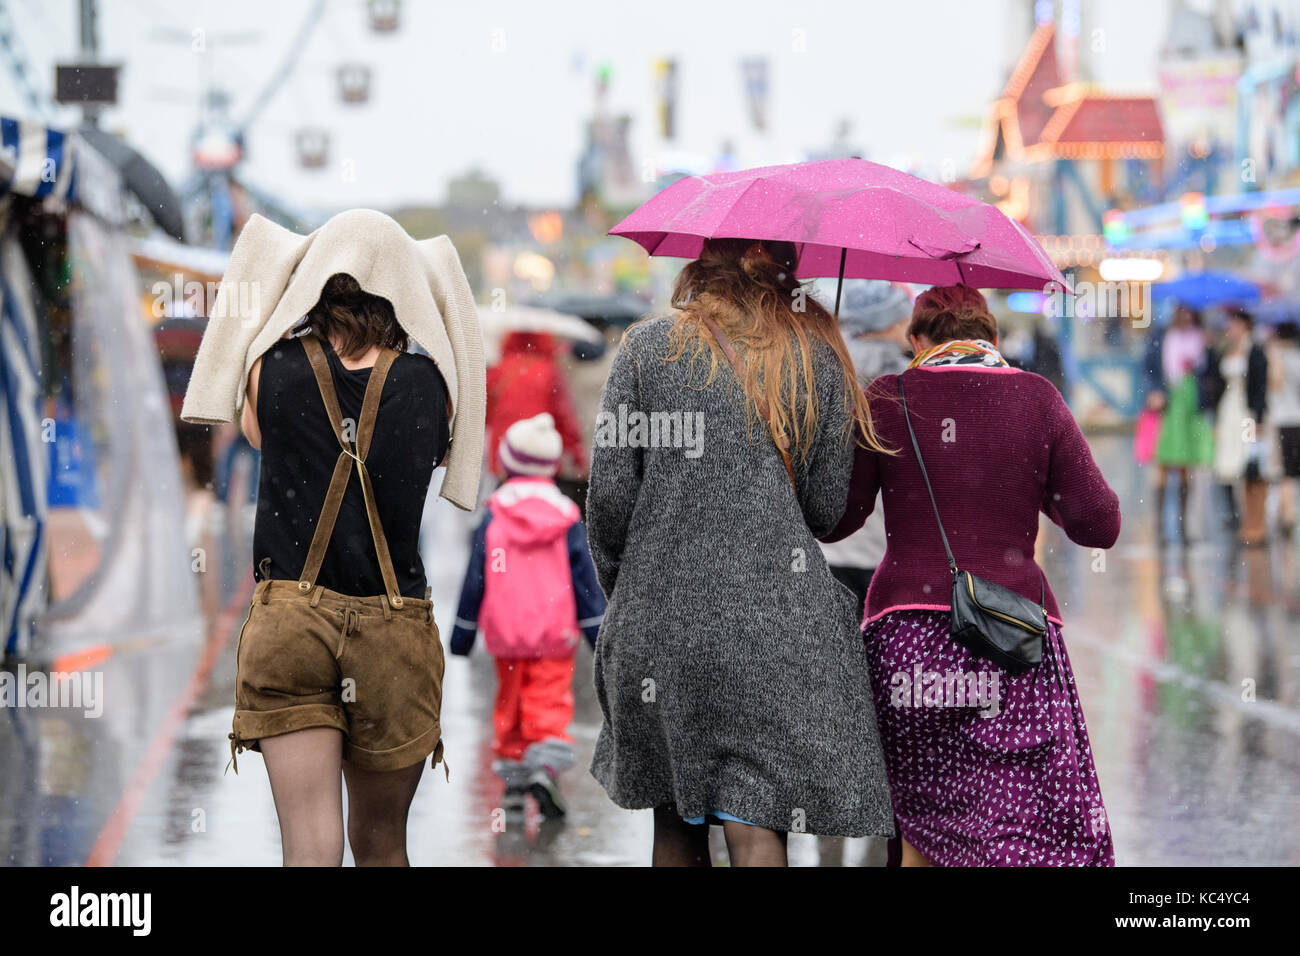 Visitors of the Oktoberfest run across the Oktoberfest fun fair grounds in the rain on the Theresienwiese meadow in Munich, Germany, 03 October 2017. After 18 days, the 184th Oktoberfest ends on 03 October 2017. Photo: Matthias Balk/dpa Stock Photo